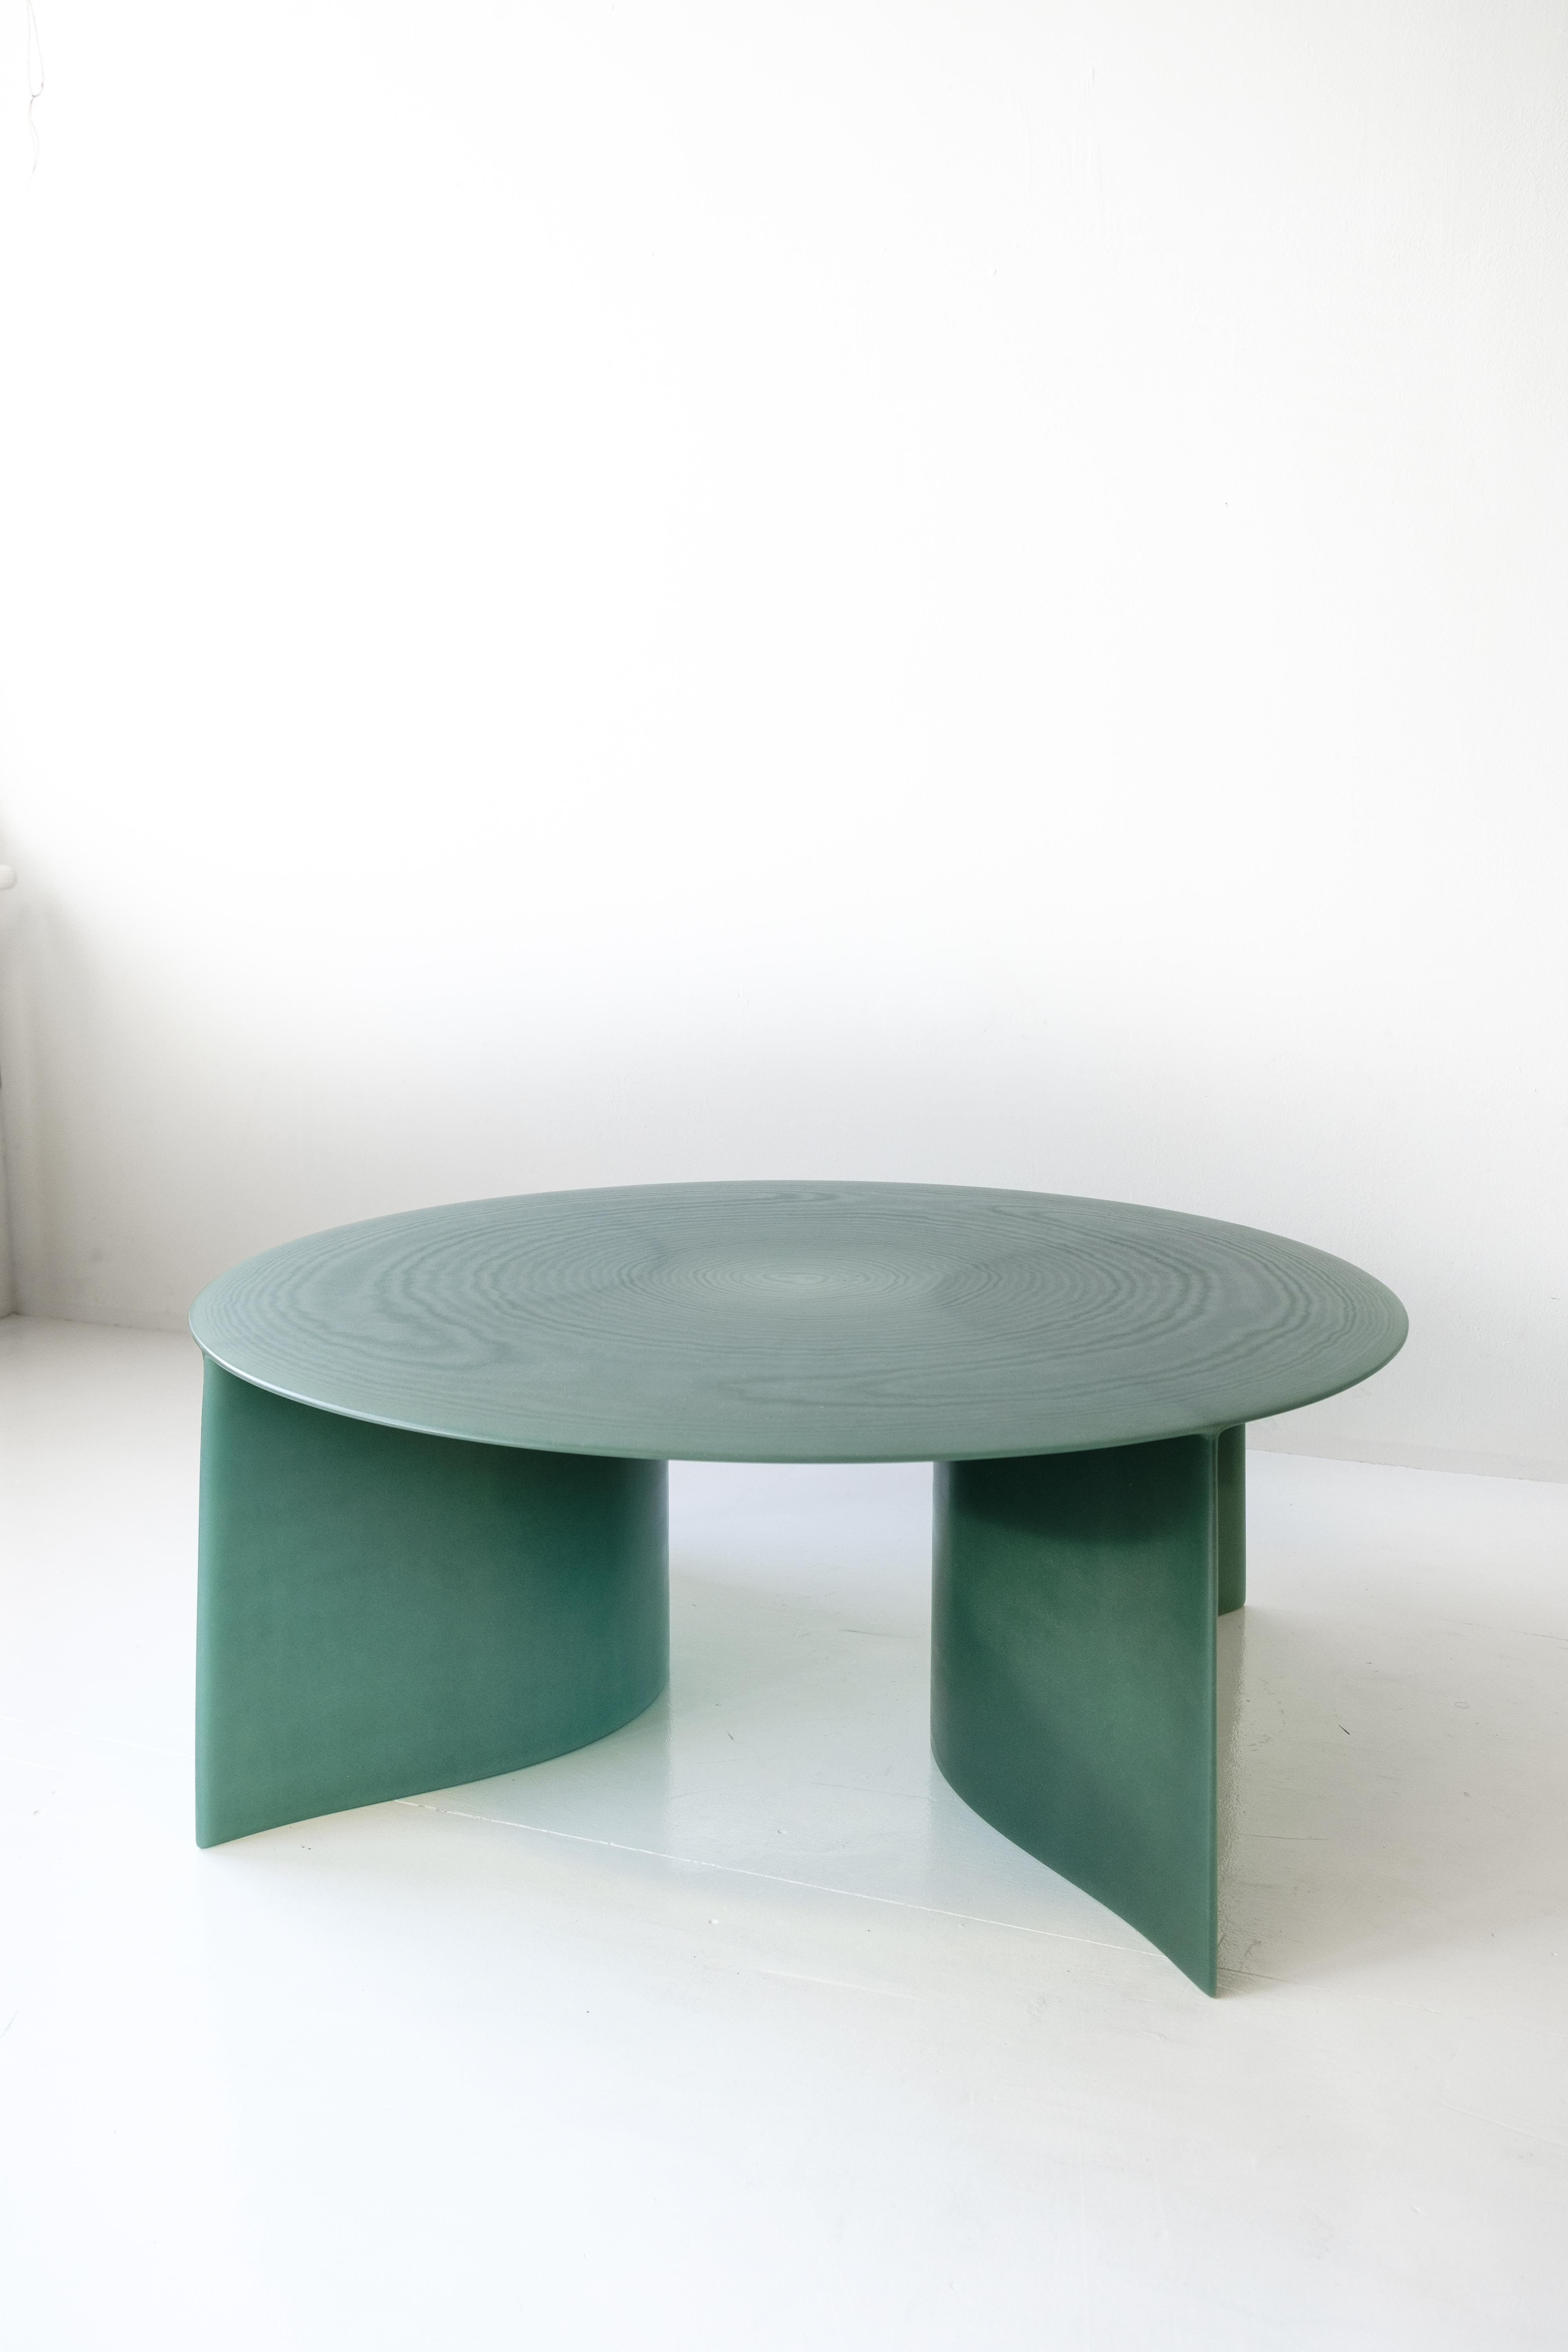 Contemporary Green Fiberglass, New Wave Coffee Table Round 100cm, by Lukas Cober For Sale 8